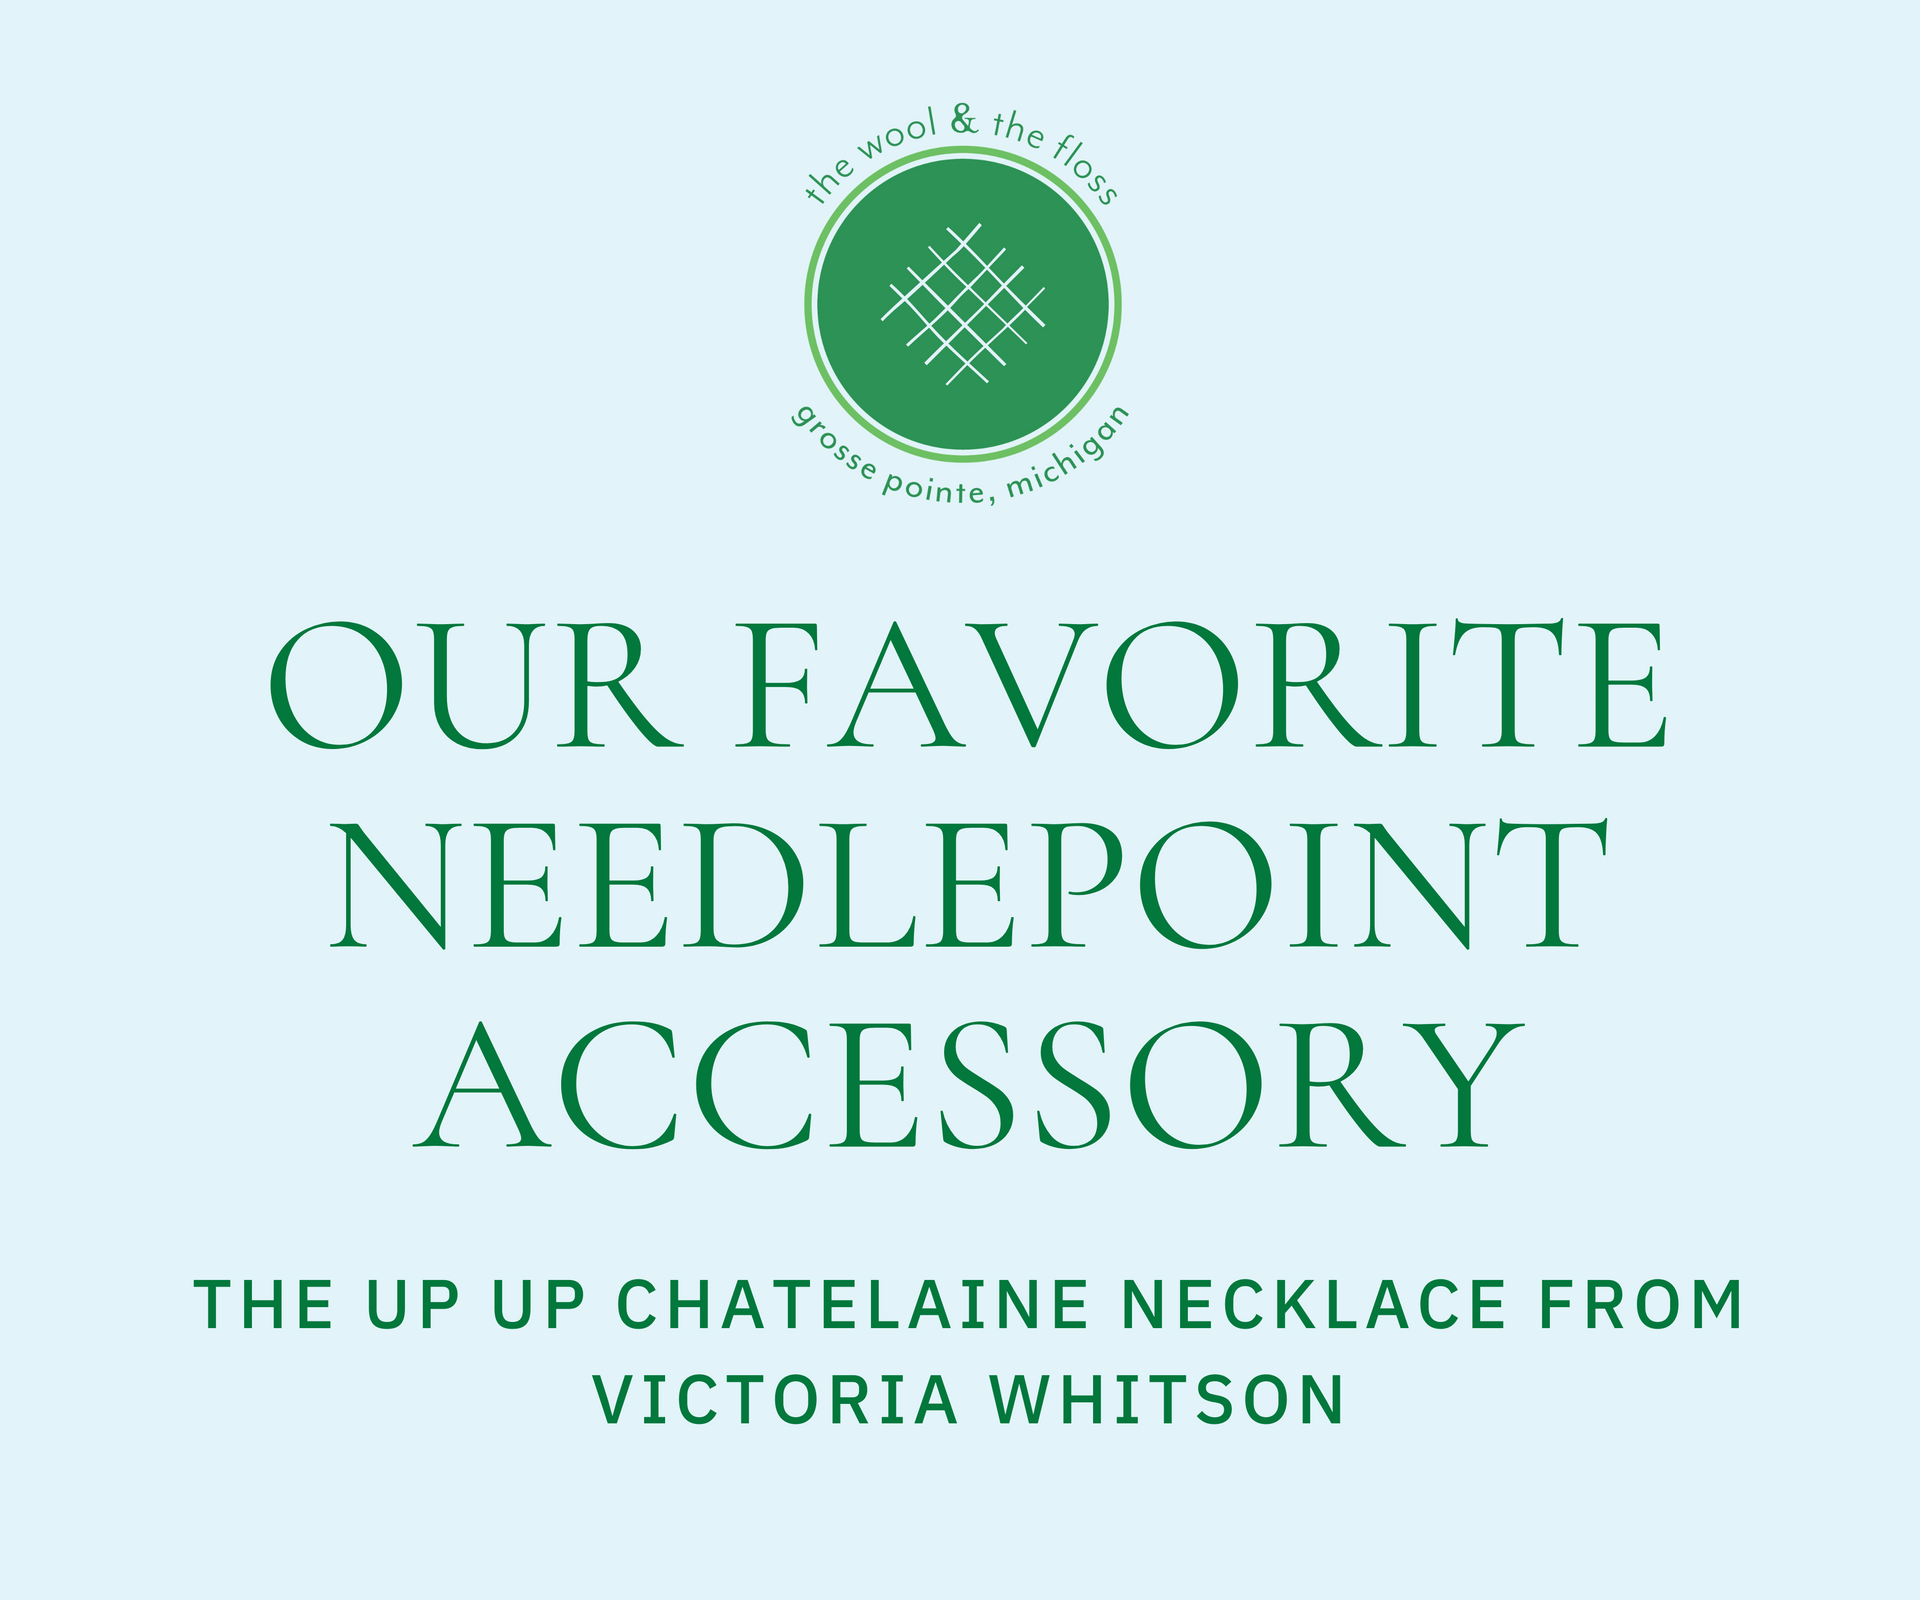 Our favorite needlepoint accessory: Up Up Chatelaine Necklace from Victoria Whitson